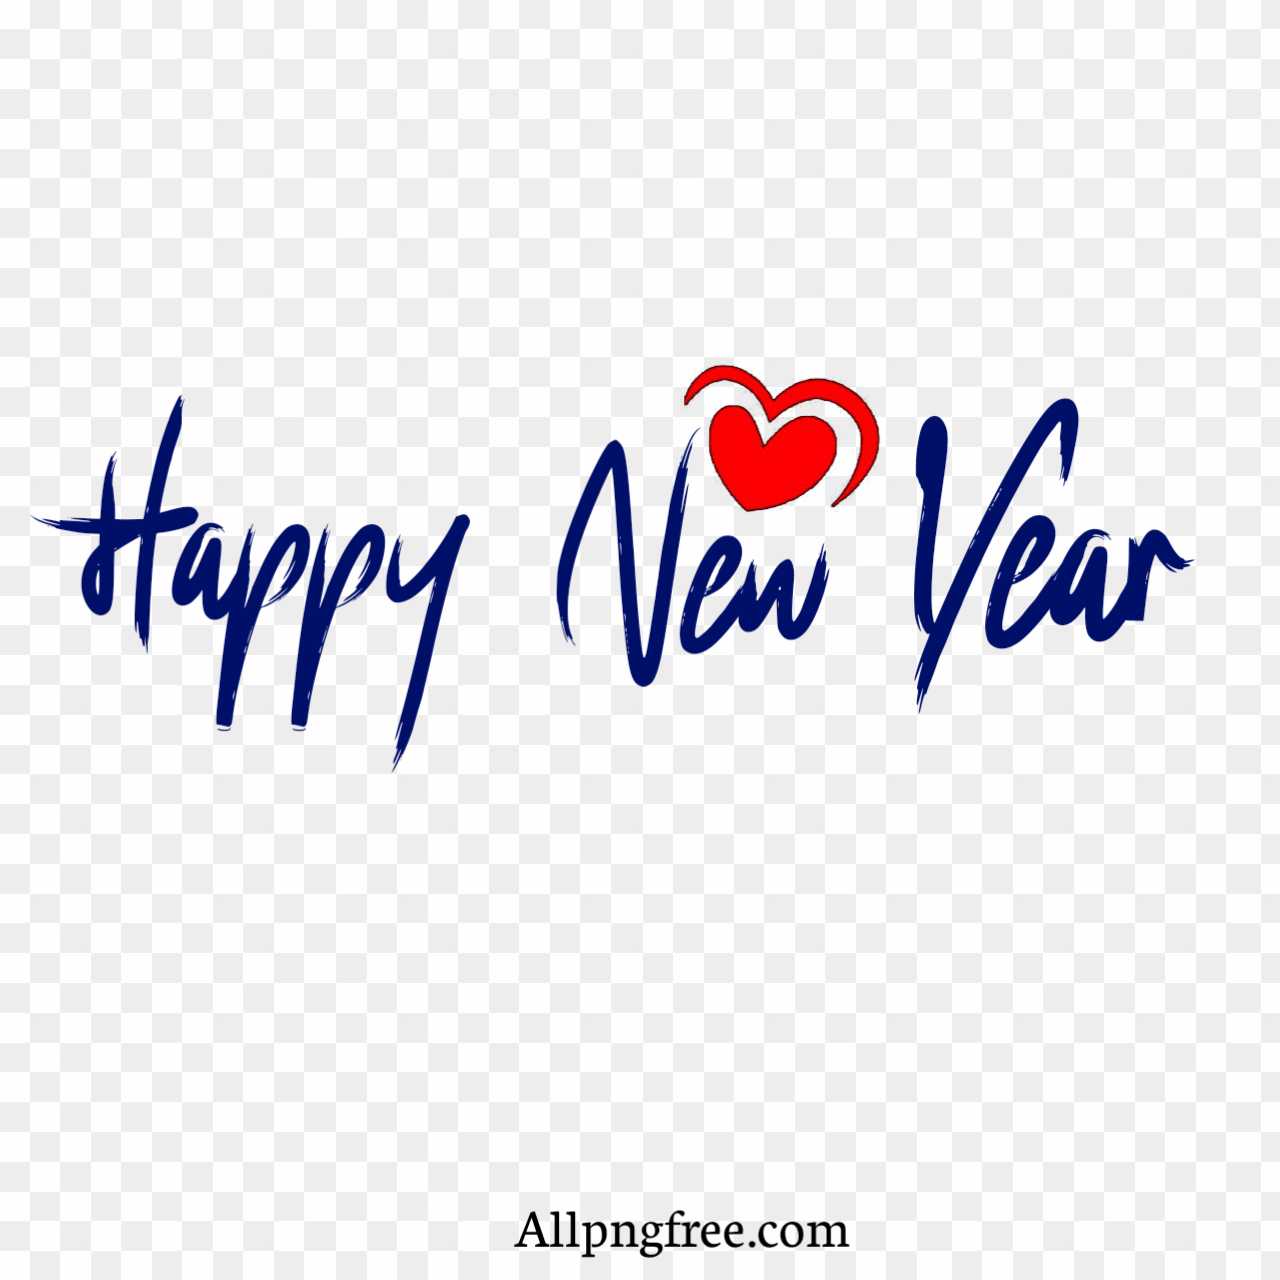 Happy New year PNG images download